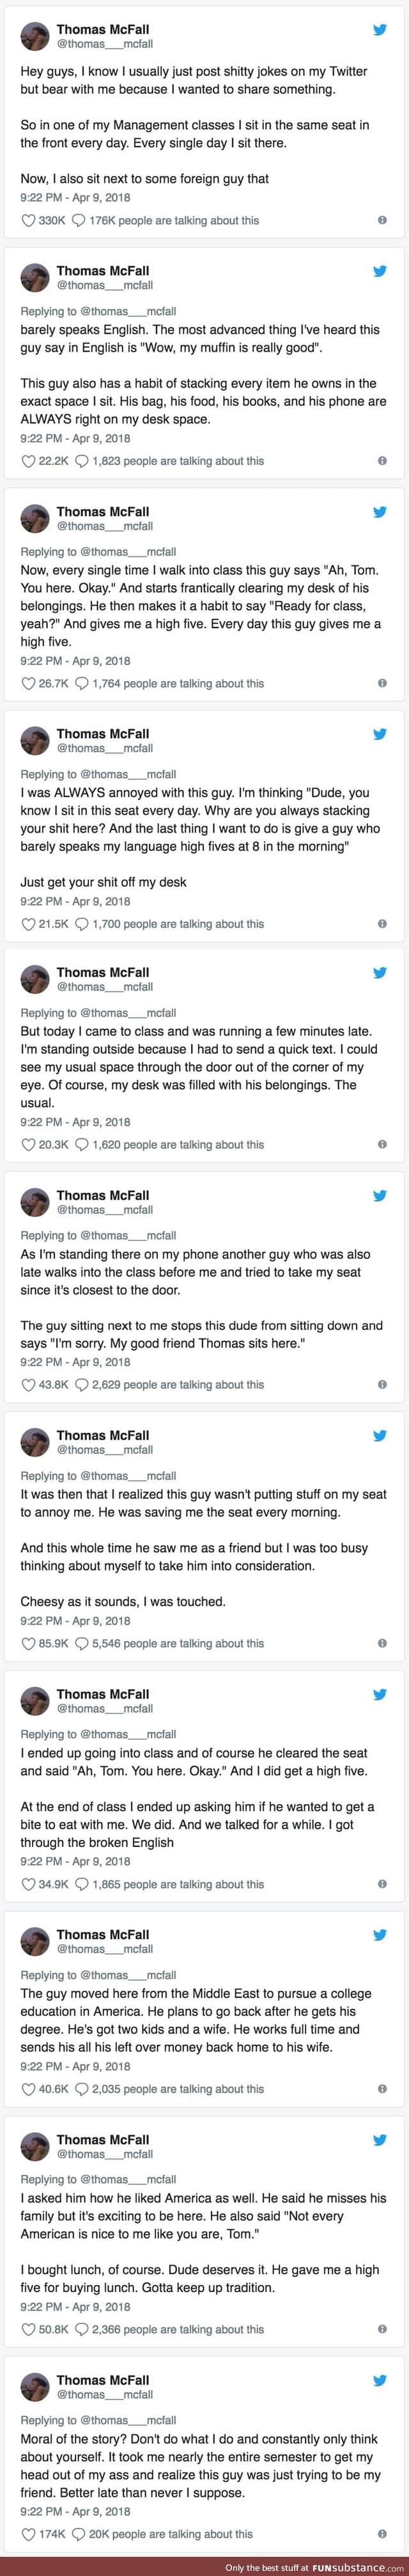 He called out his own ignorance for misjudging a foreign classmate